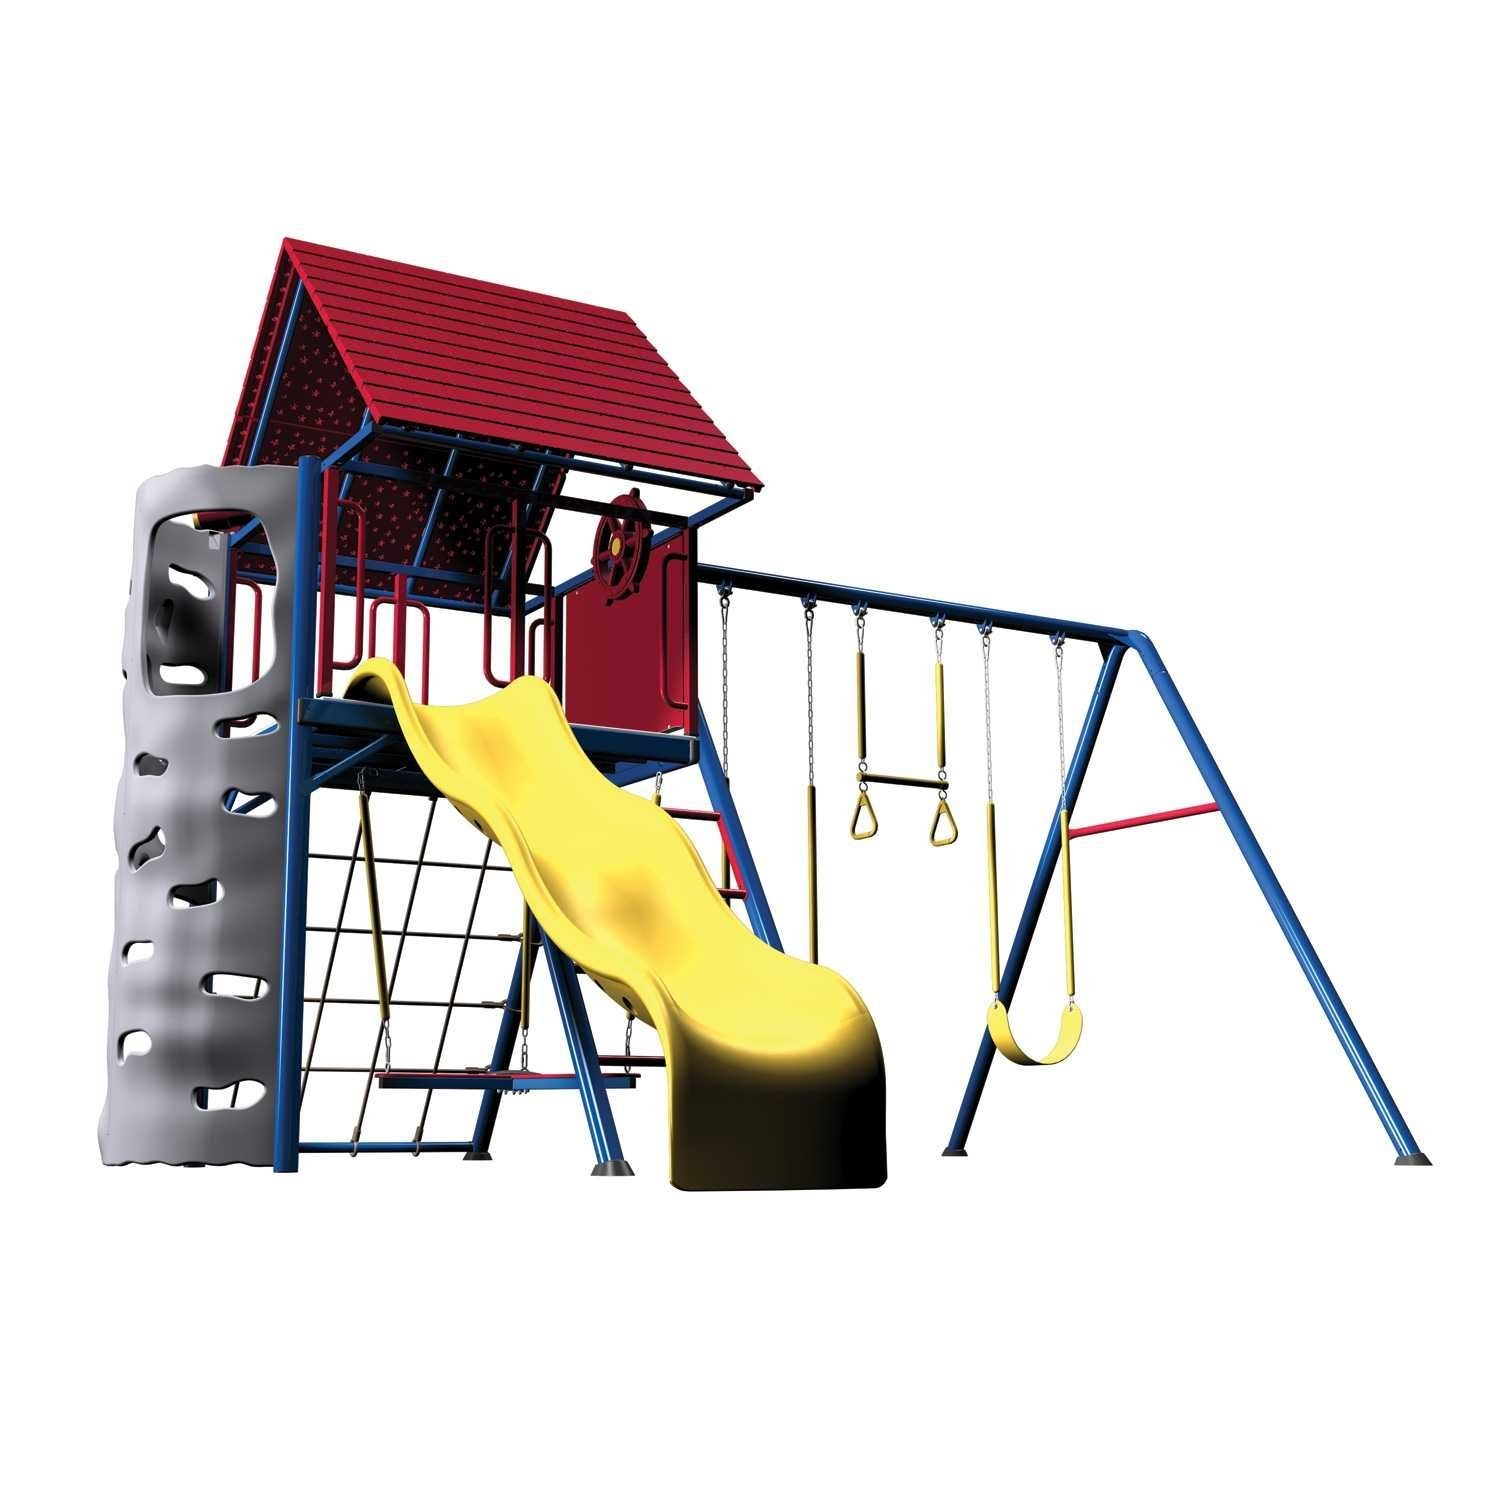 Category: Playground Play Sets